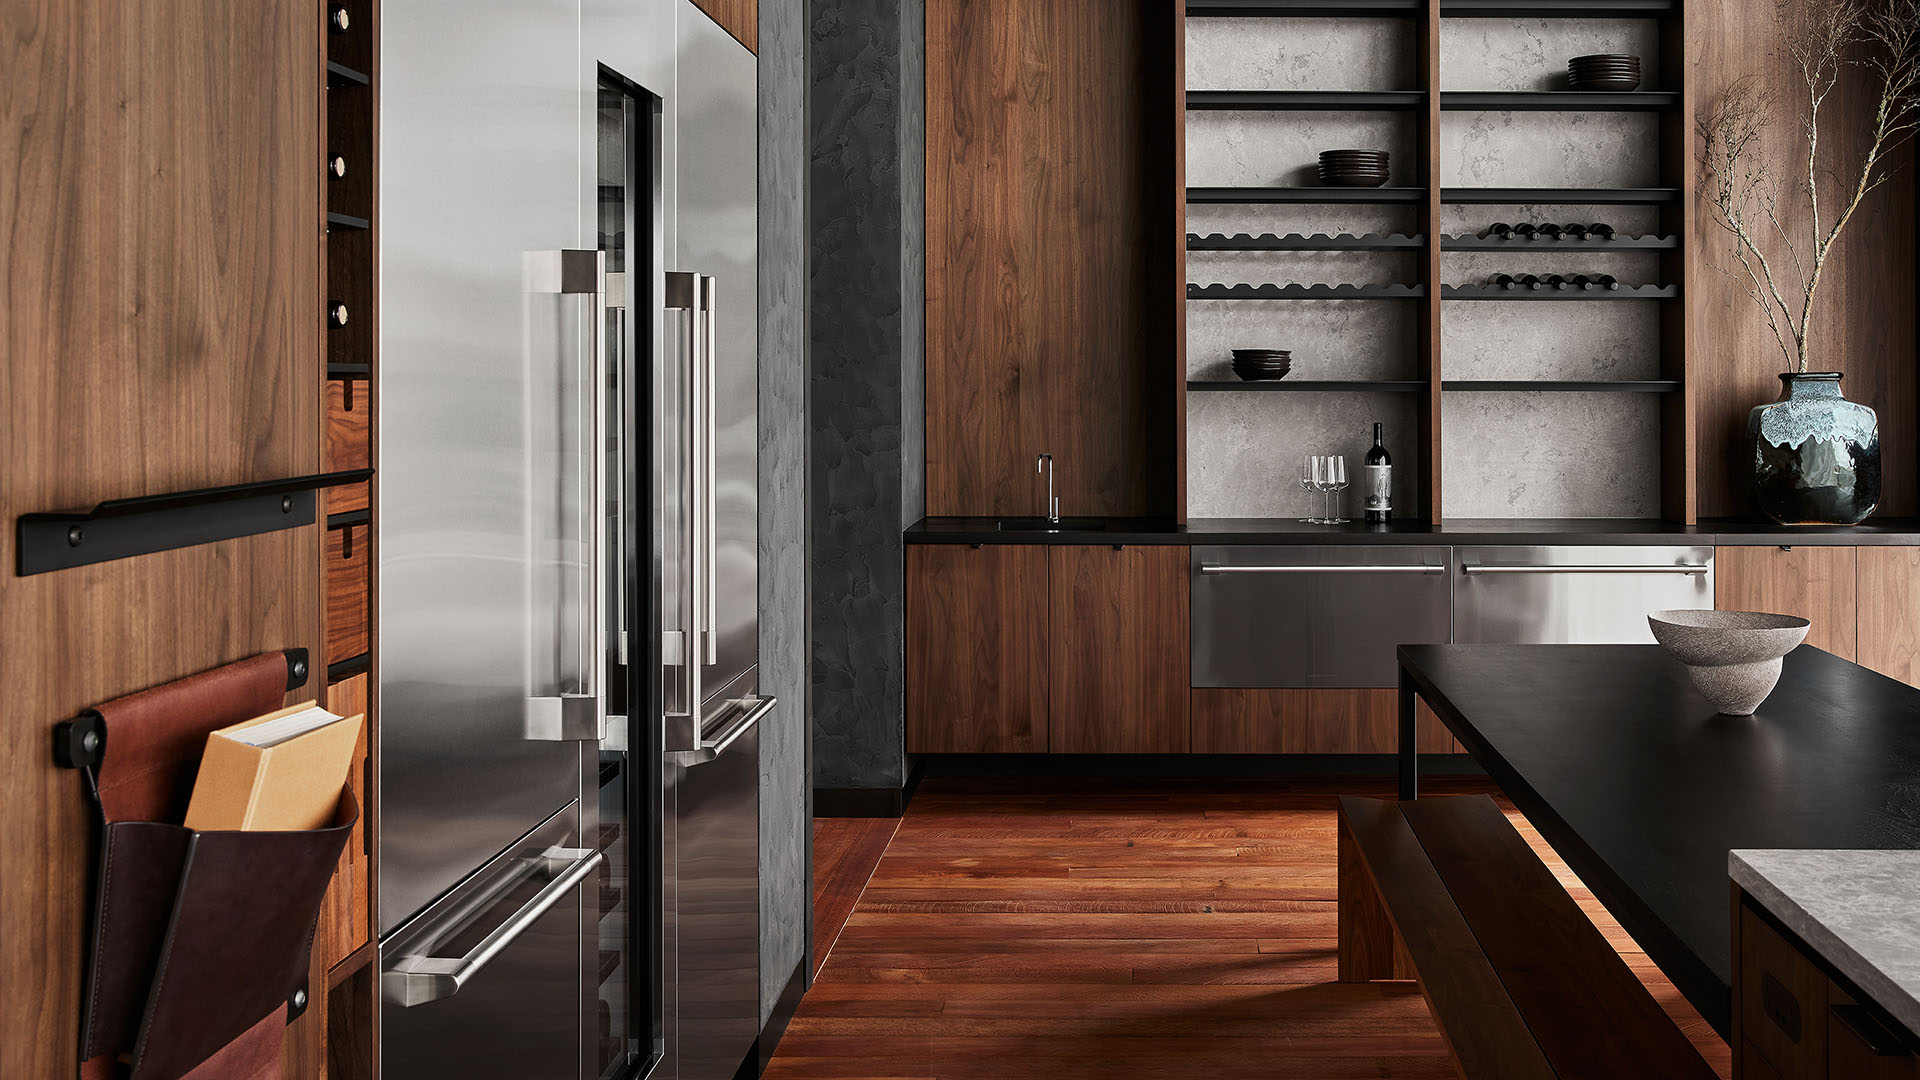 The high-grade stainless-steel refrigerators and wall-hung wet bar